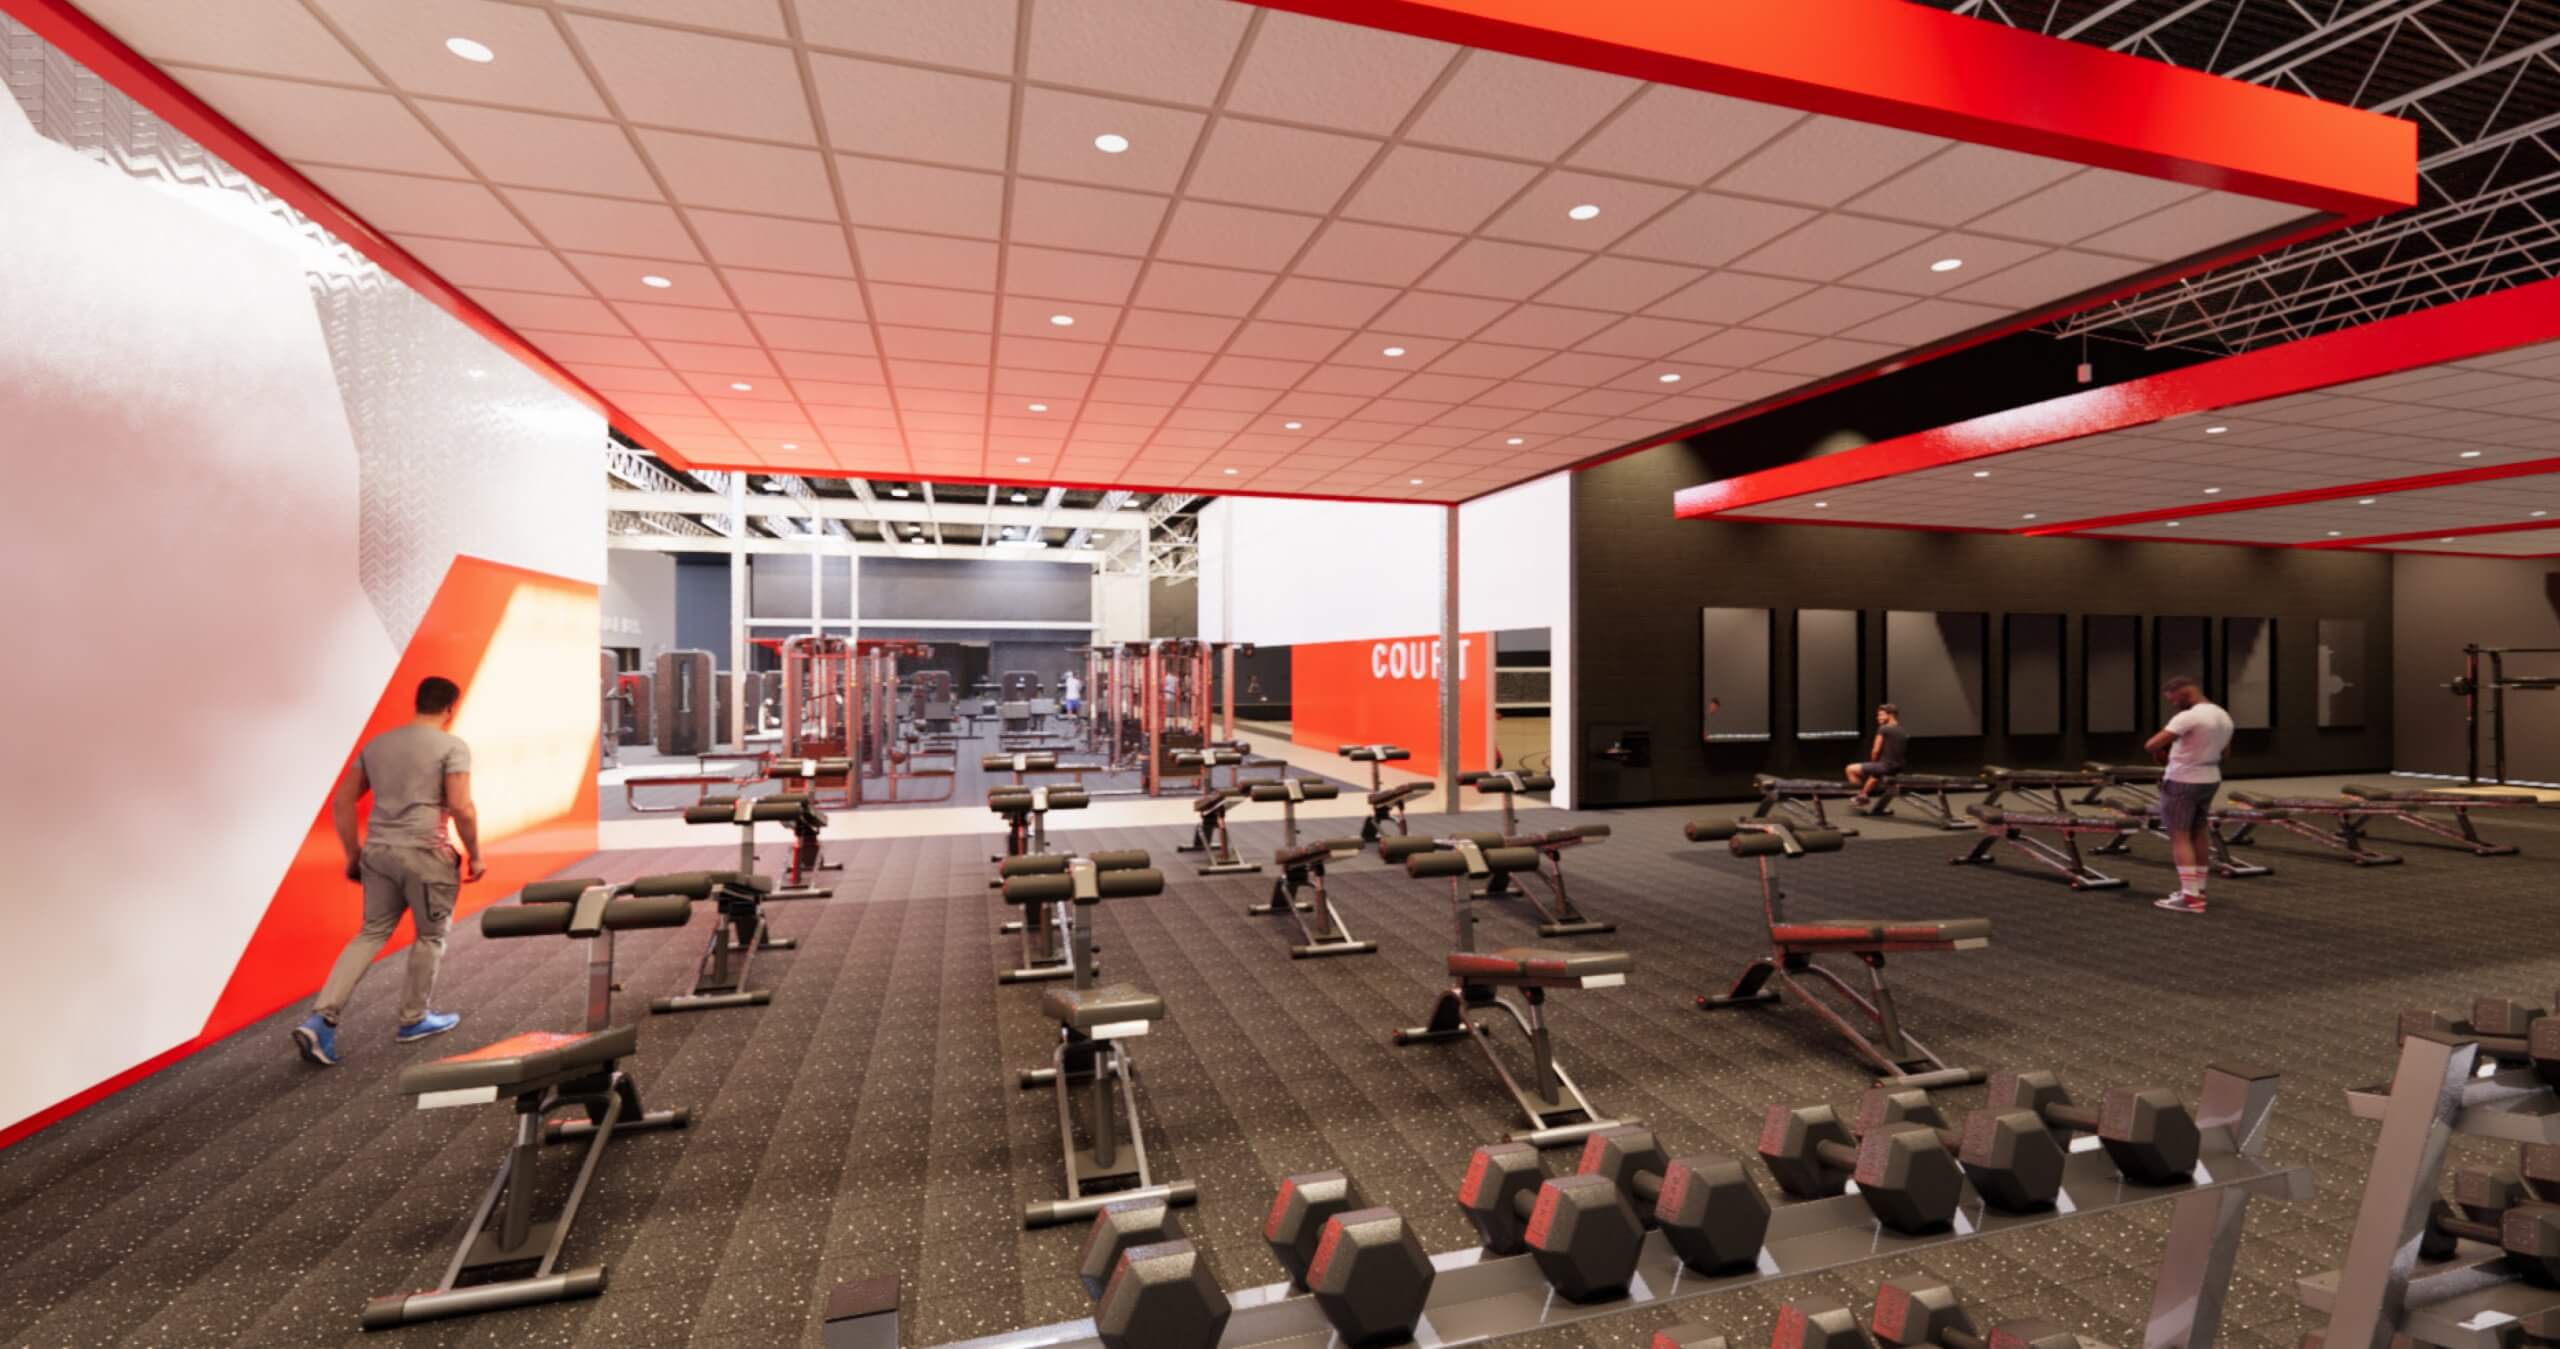 An Image of the Northville, MI Powerhouse Gym Location